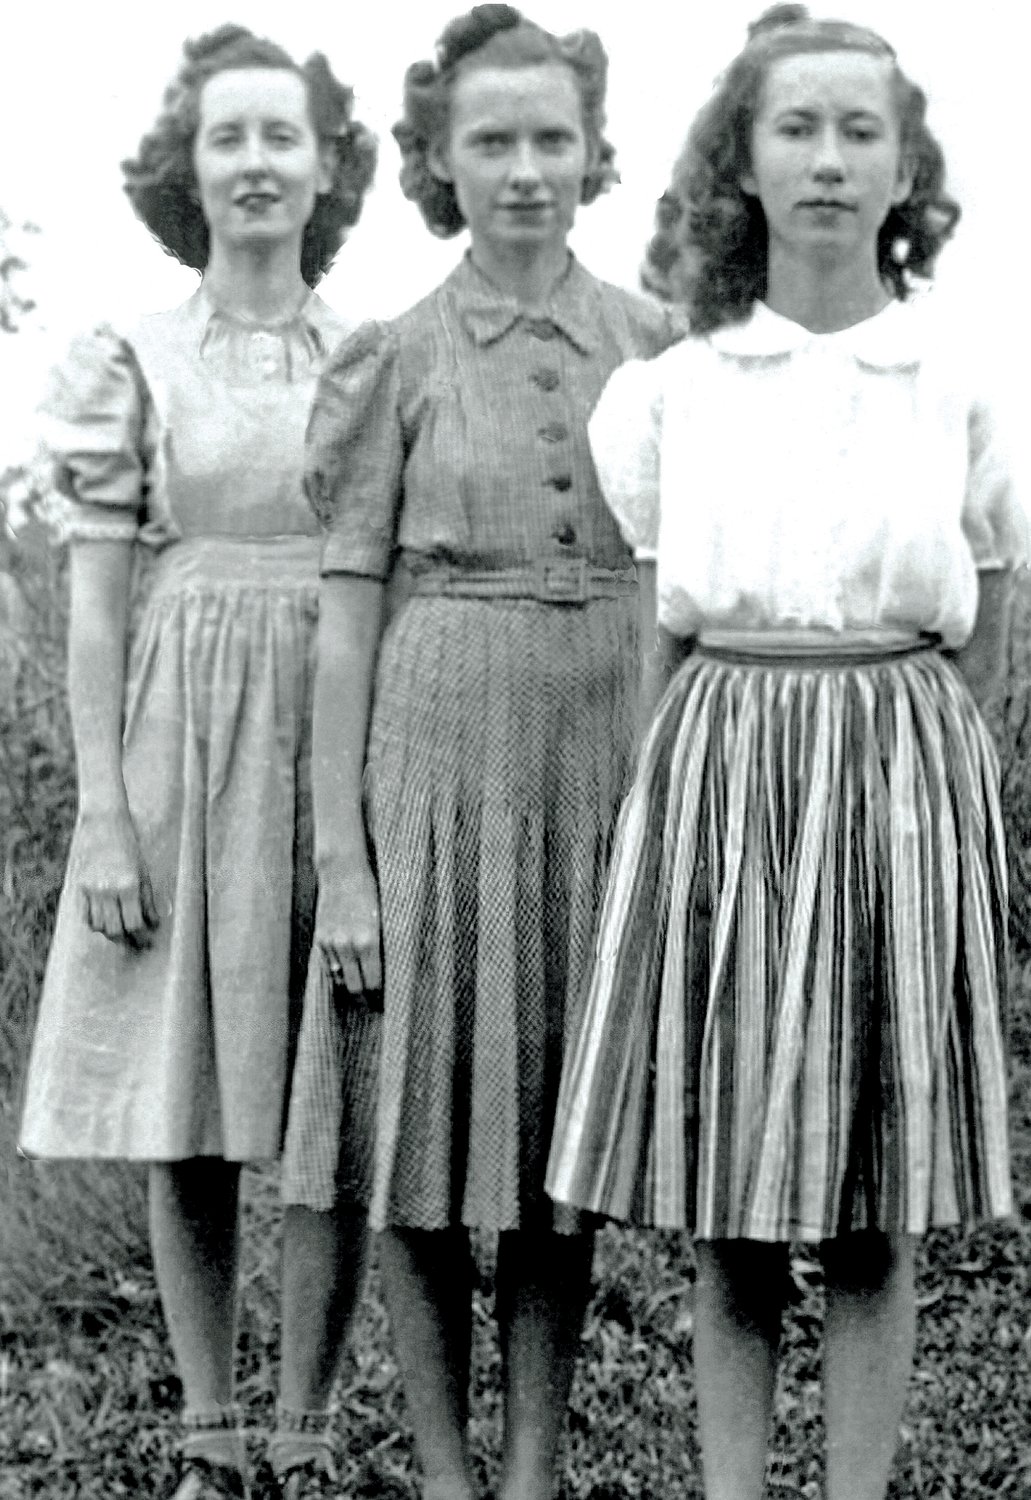 Dorothy, Mildred and Esther were the daughters of Grover and Sylvia Aiken Hill. [Photo courtesy Patricia Speer]